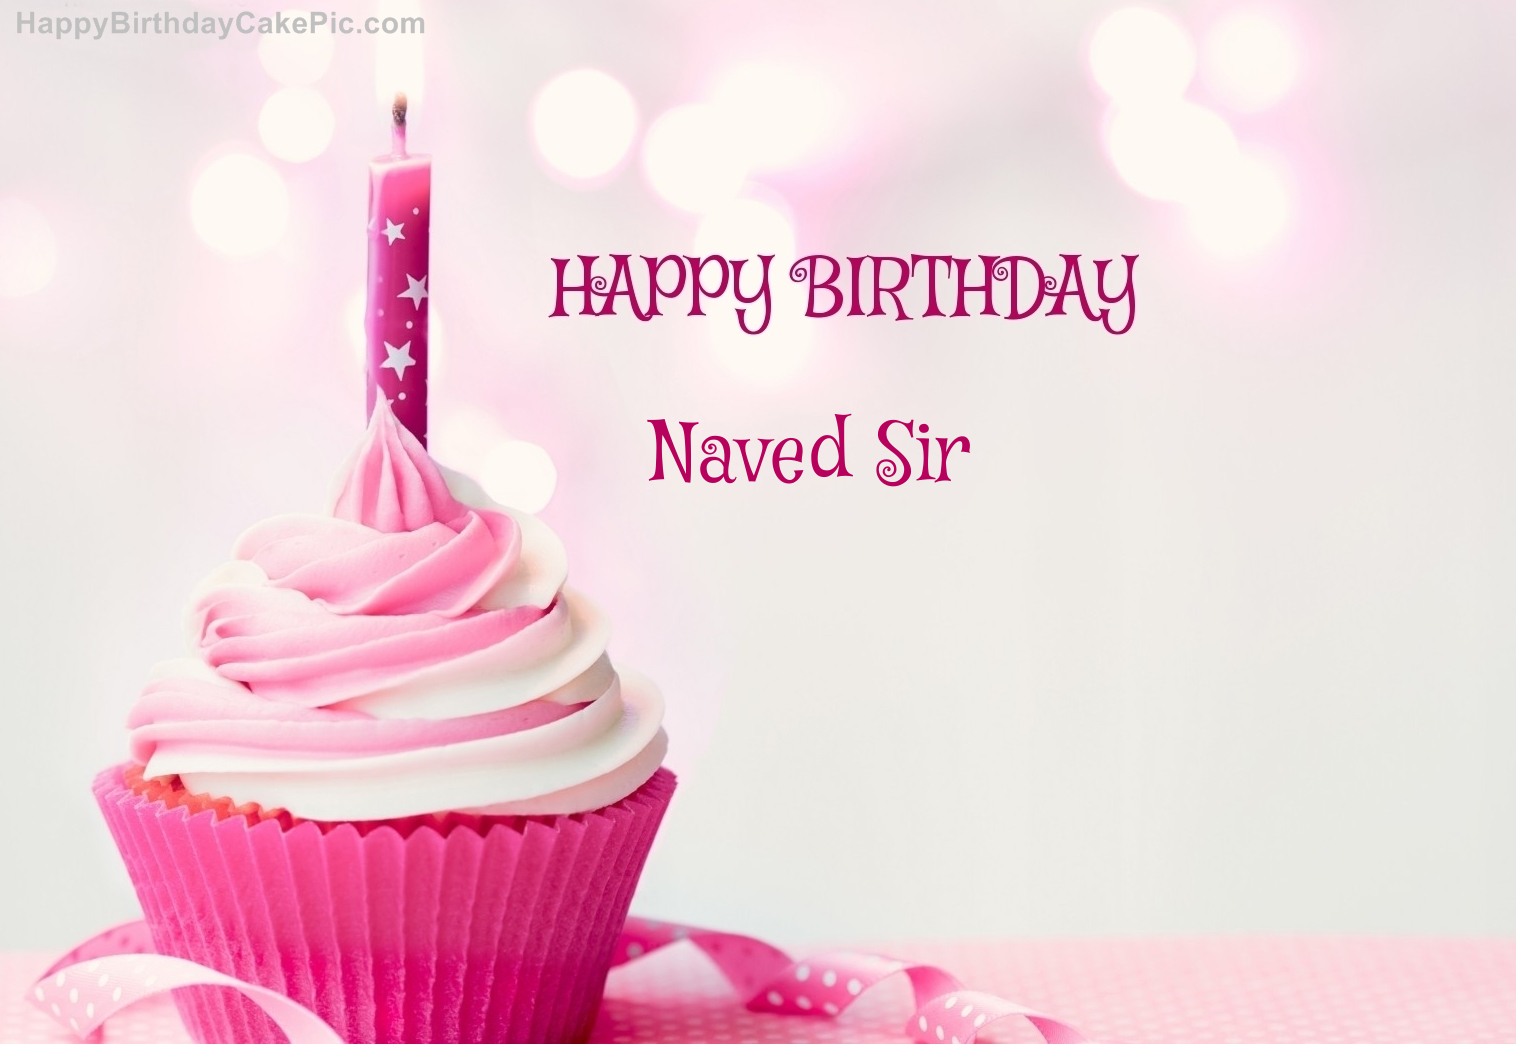 ️ Happy Birthday Cupcake Candle Pink Cake For Naved Sir